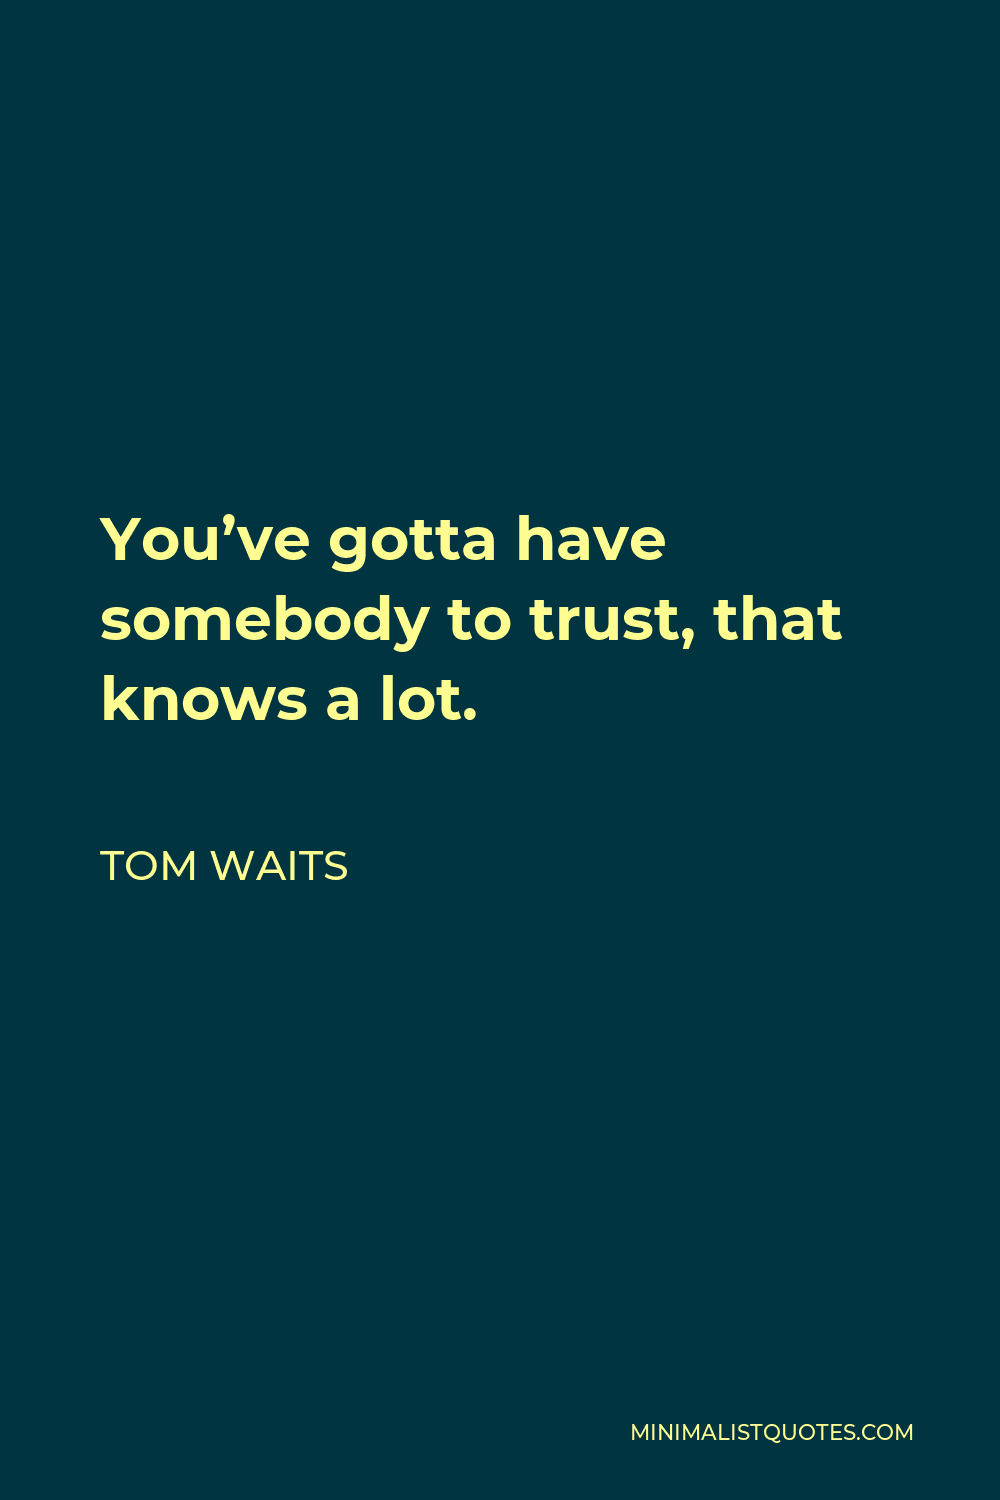 Tom Waits Quote - You’ve gotta have somebody to trust, that knows a lot.